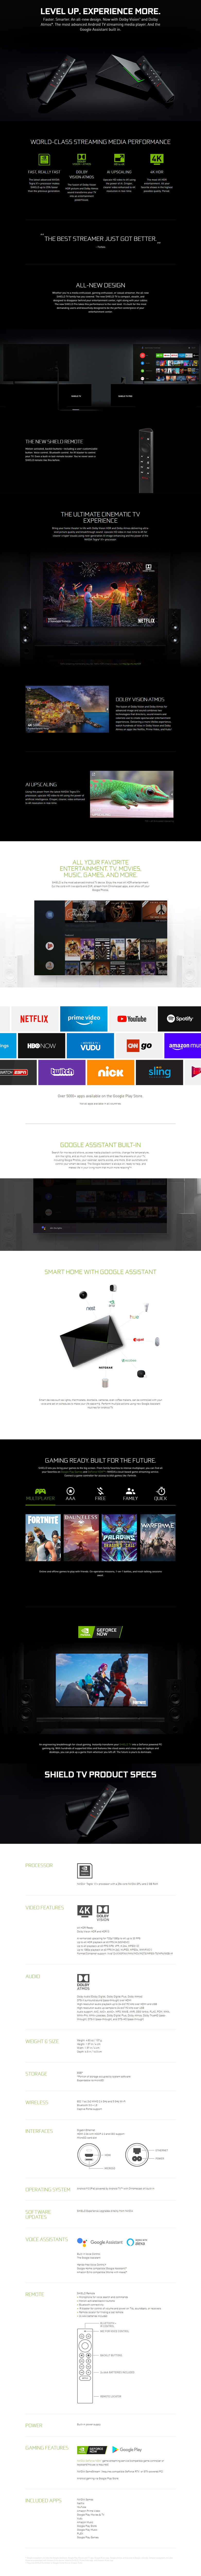 A large marketing image providing additional information about the product NVIDIA Shield TV Android Media Player - Additional alt info not provided